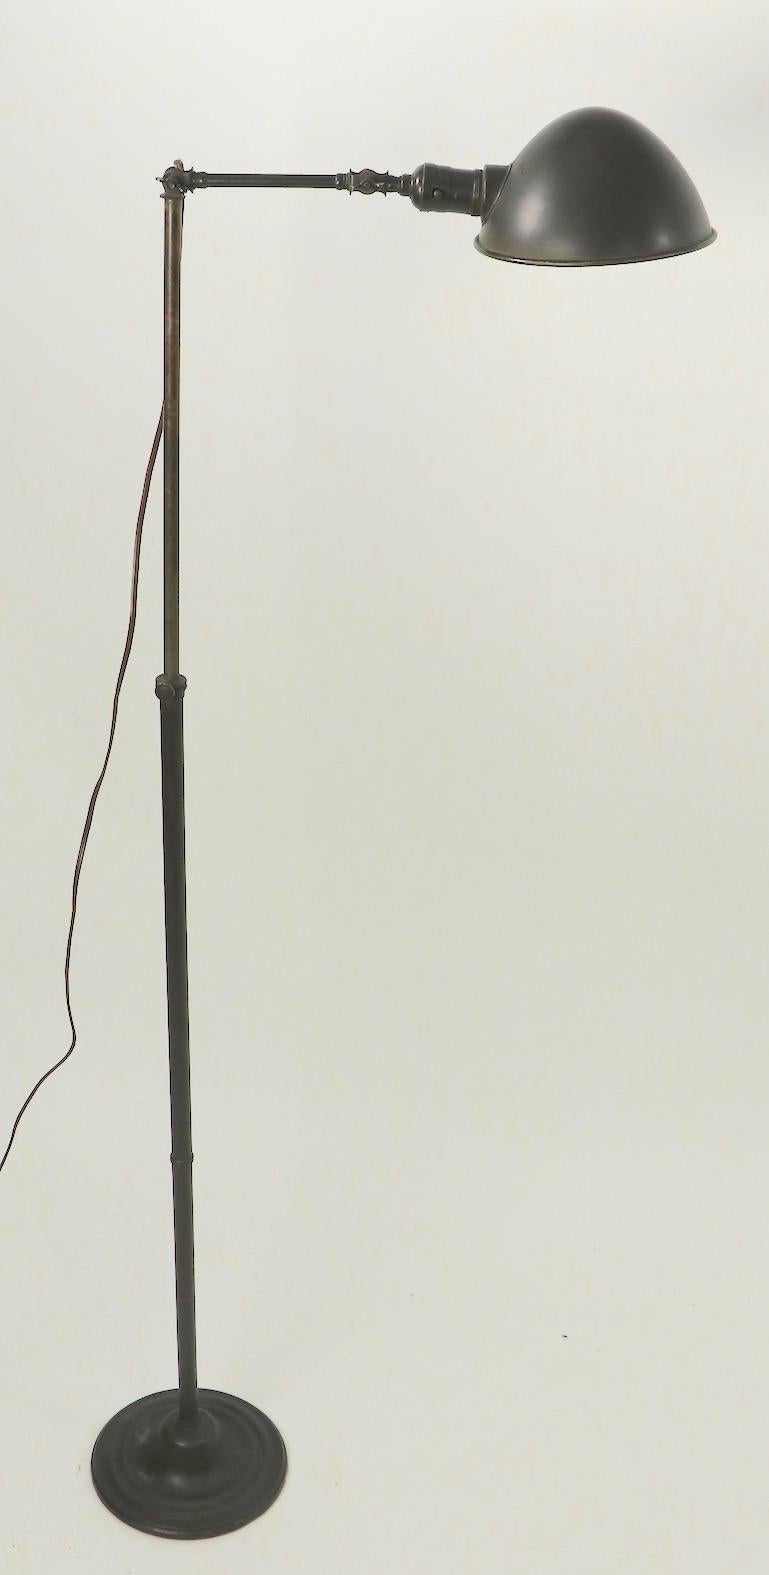 Very nice Industrial style brass floor lamp, in very good original and working condition. This lamp is adjustable in height 35 in. Lowest position x 60 in. Highest position, the arm is 16 in L, Base 8 in. dia. and the hood shade can be tipped to